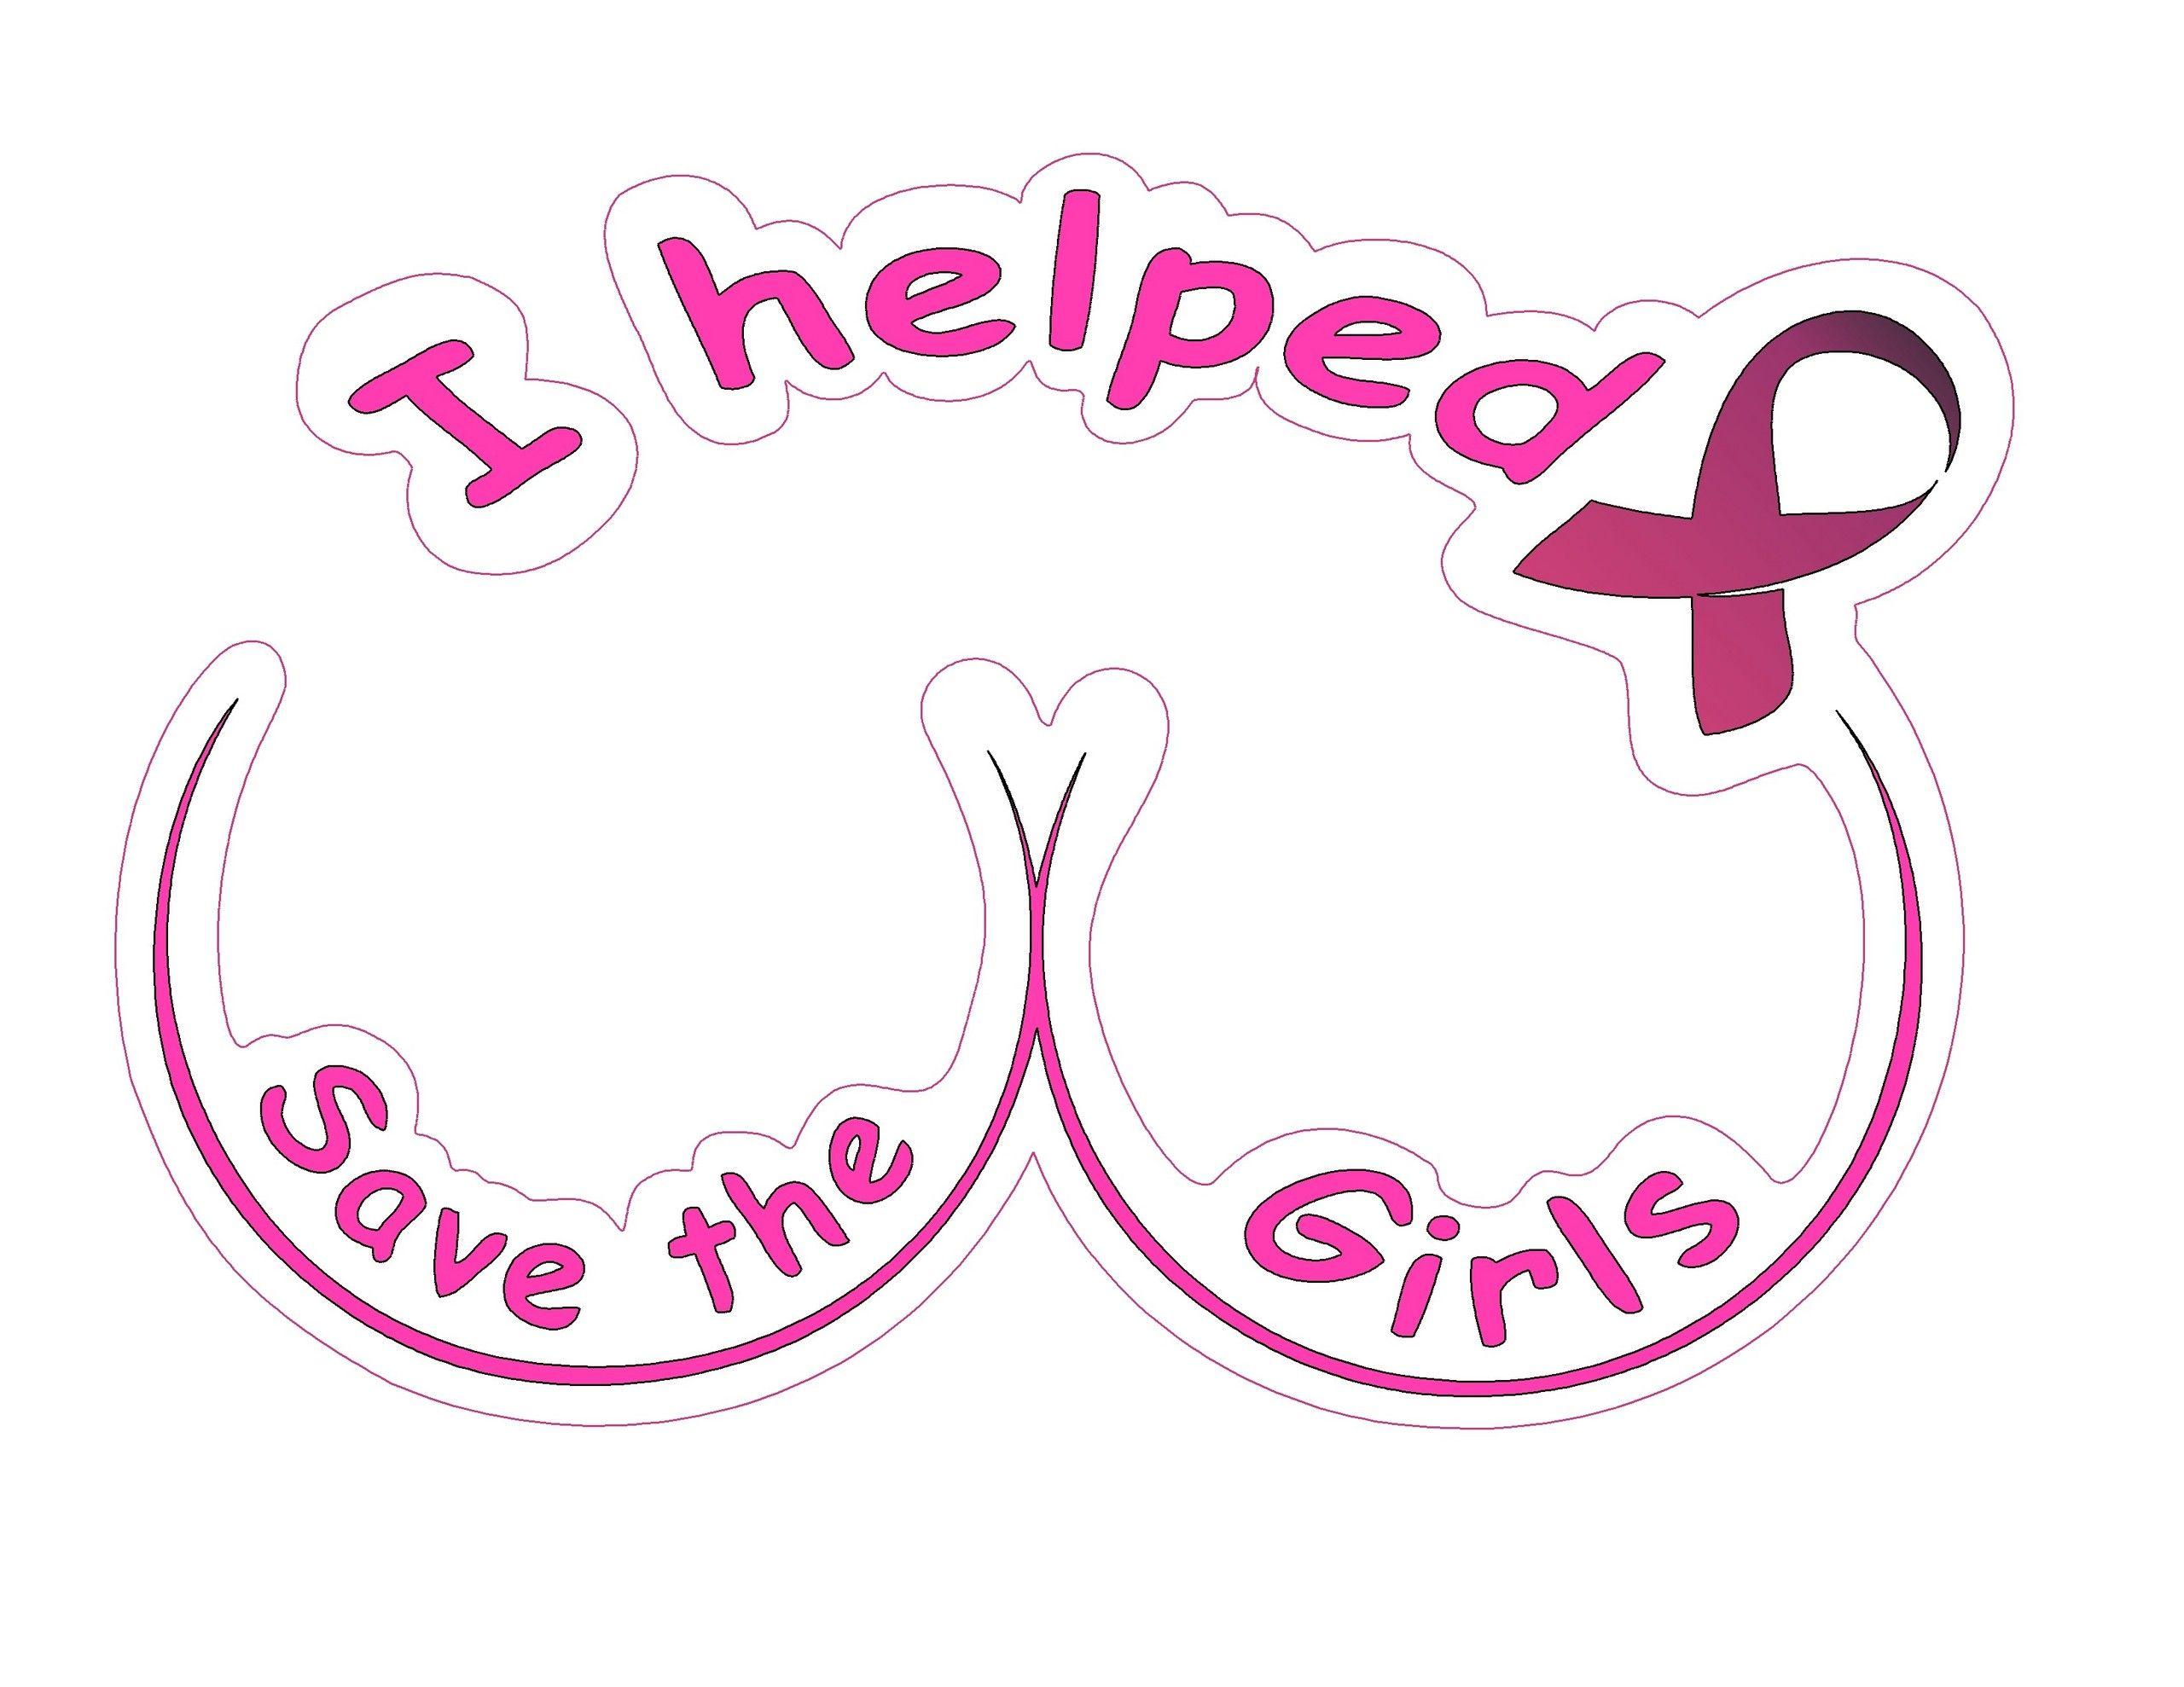 Pink Ribbon Breast Cancer Wallpaper FREE  Backgrounds  Lockscreens by  Stafford Signs